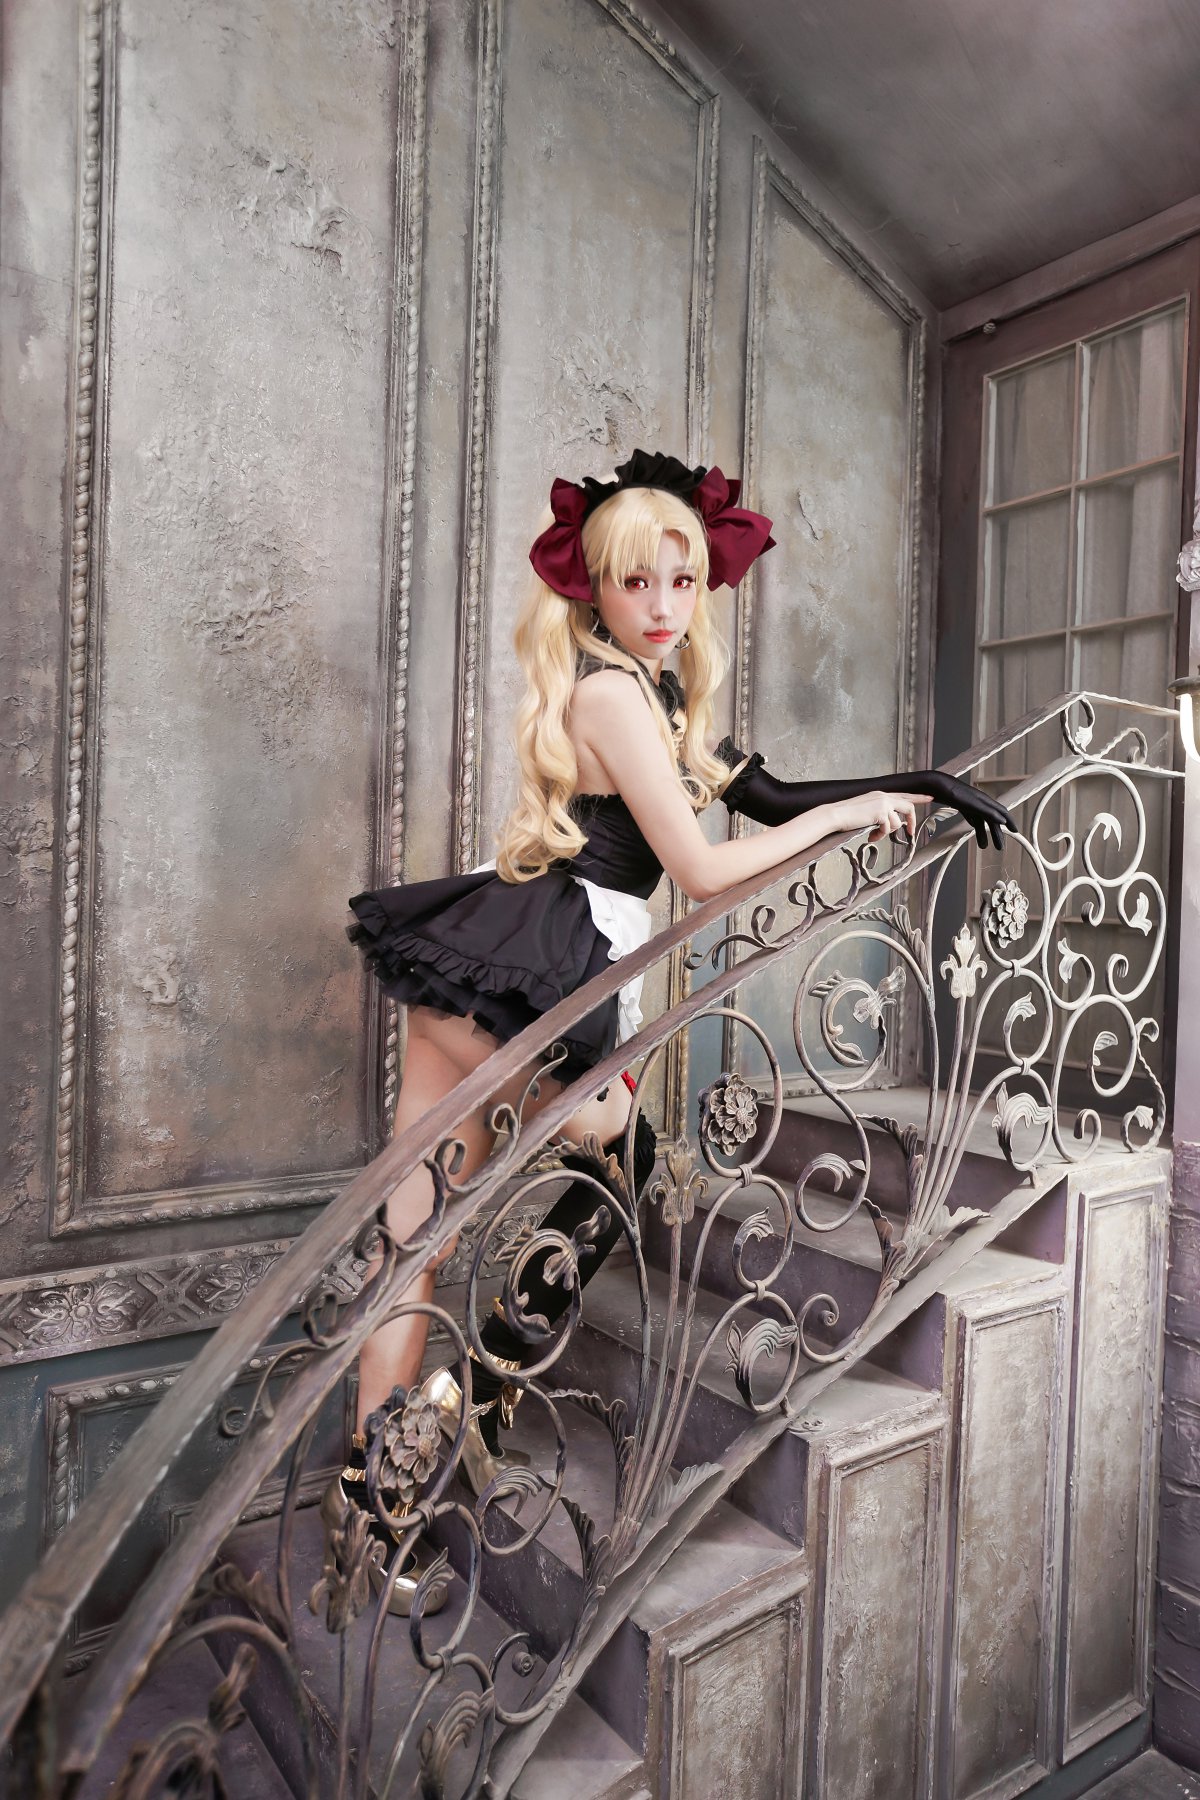 Coser@Ely Vol.022 ERE エレシュキガル 写真 A 0084